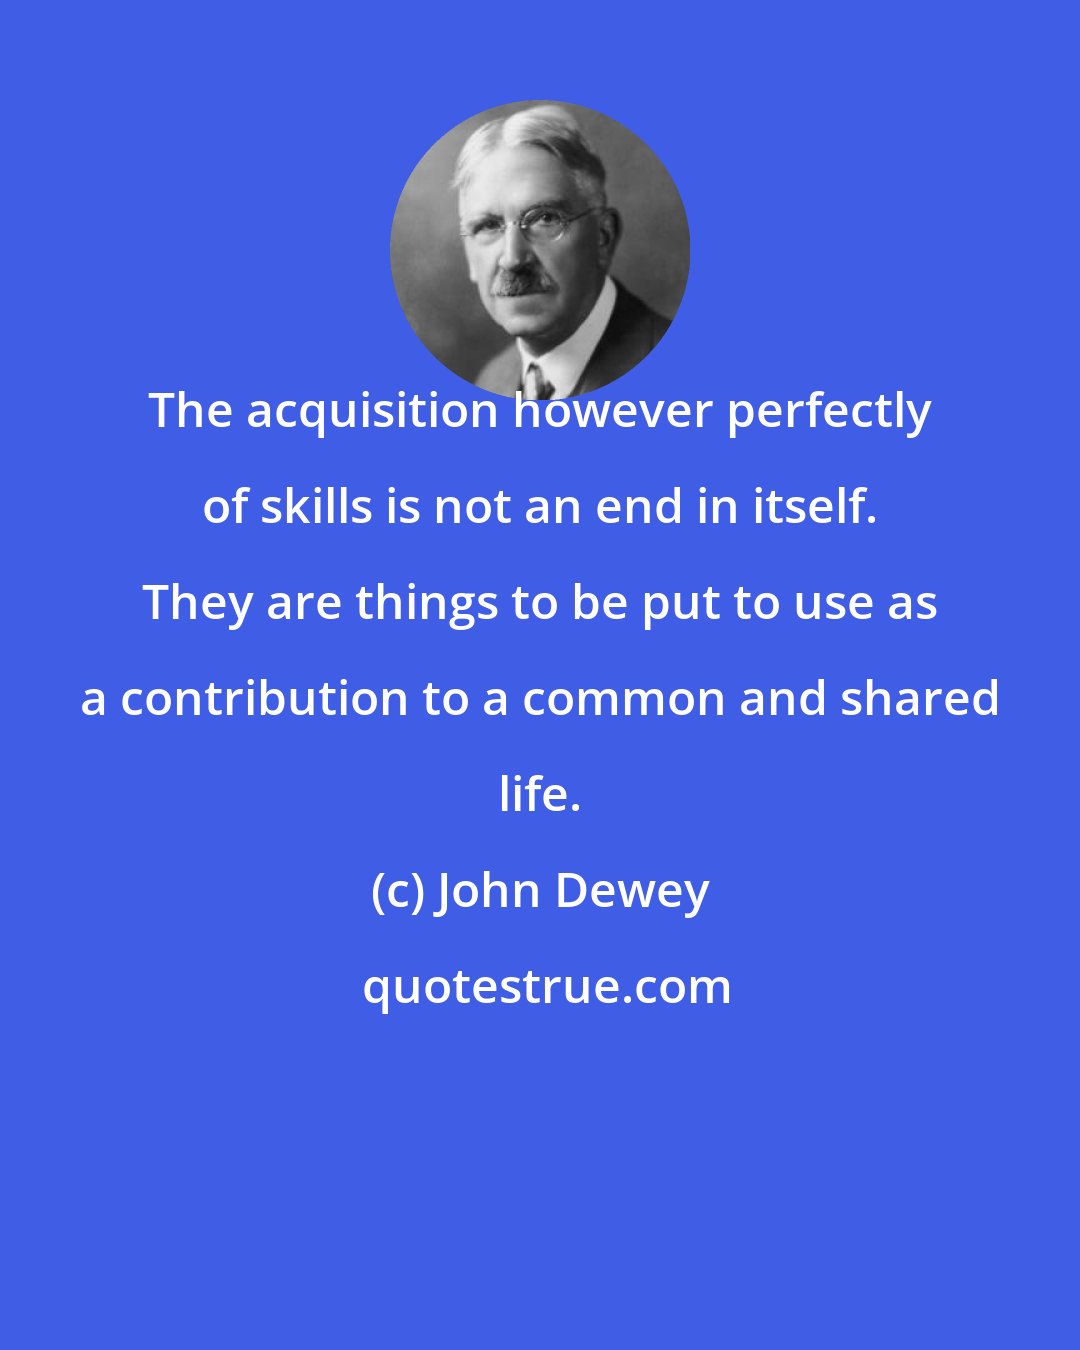 John Dewey: The acquisition however perfectly of skills is not an end in itself. They are things to be put to use as a contribution to a common and shared life.